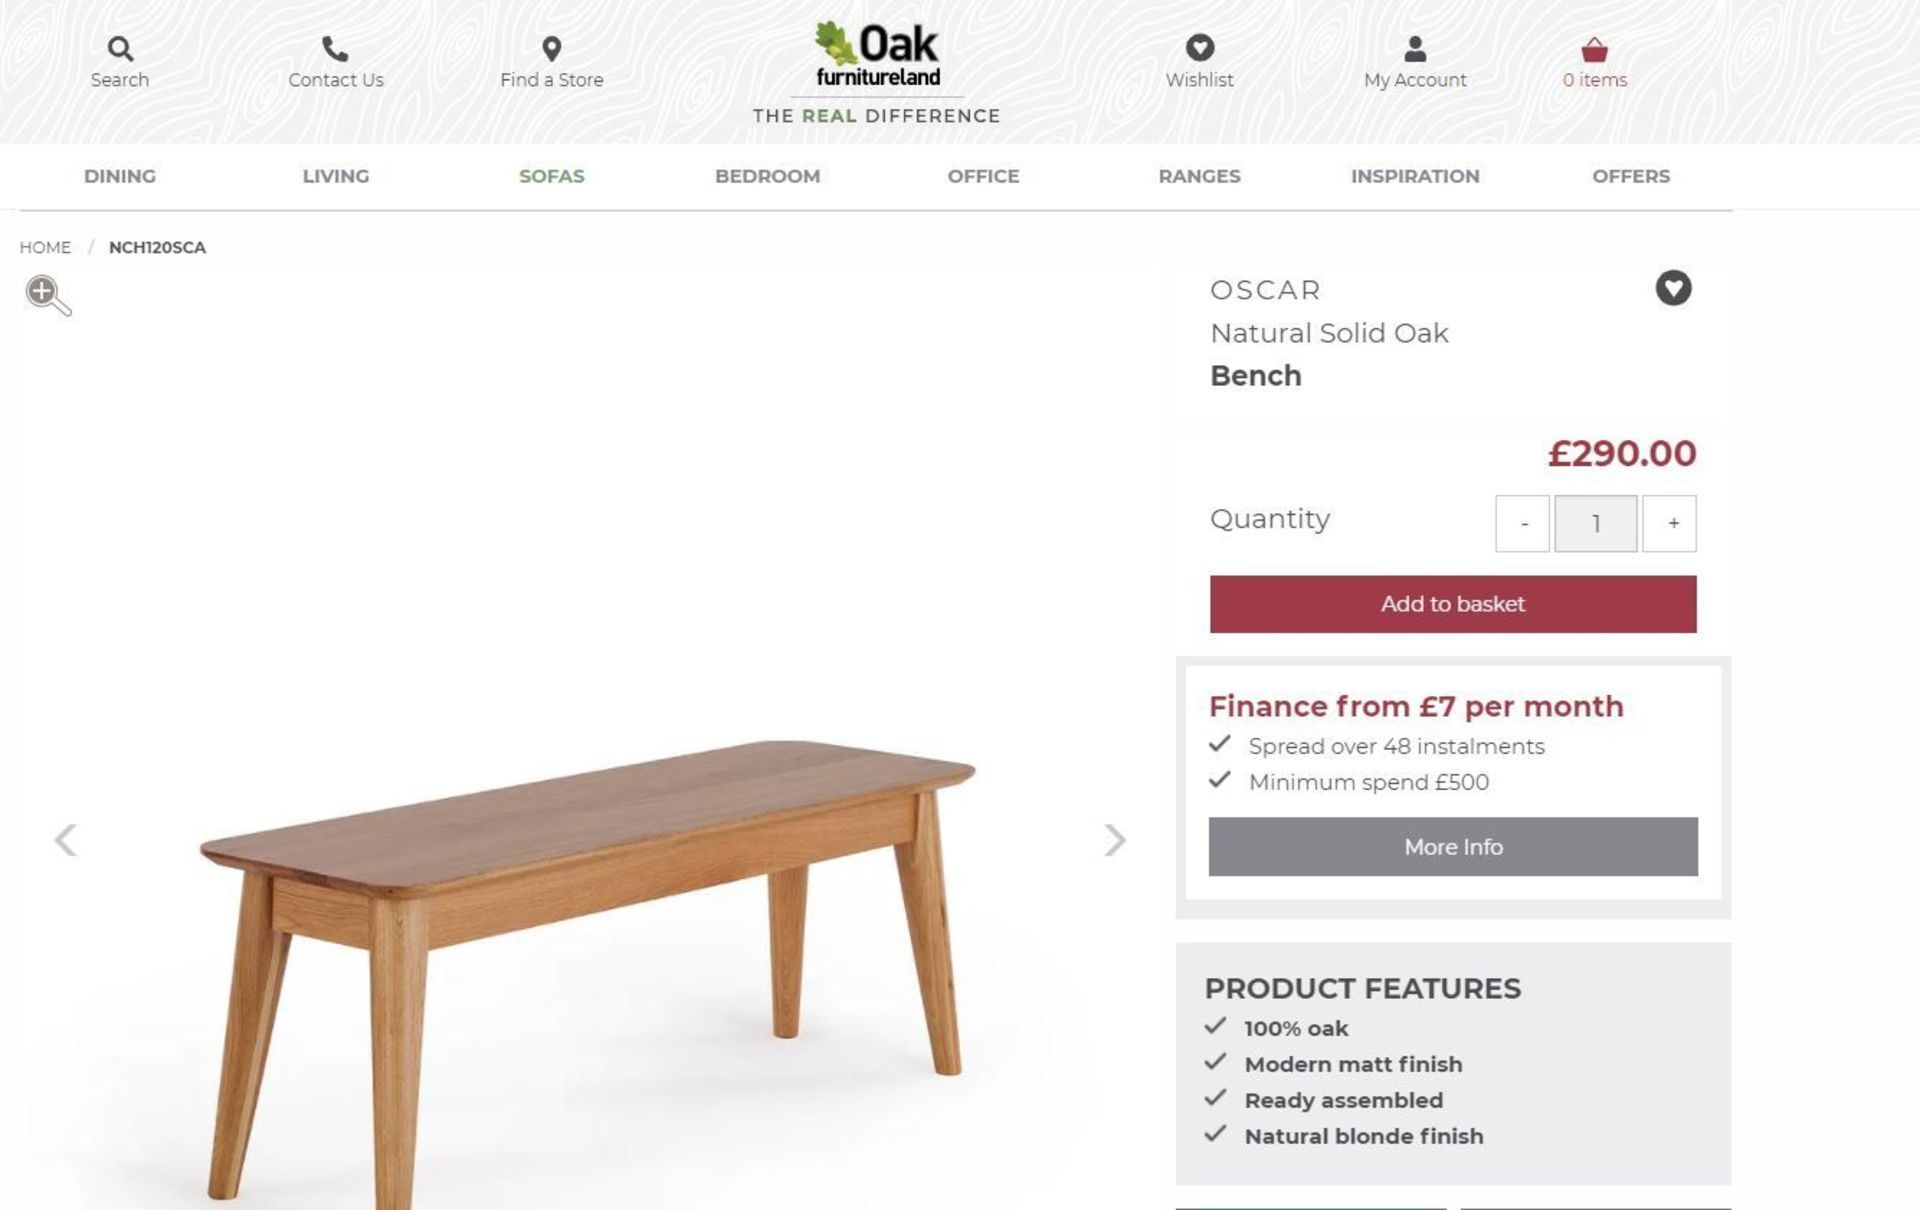 10 x New Boxed - Oscar Natural Solid Oak Bench. 120cm Long. RRP £290 EACH, TOTAL LOT RRP £2,900. - Image 2 of 2